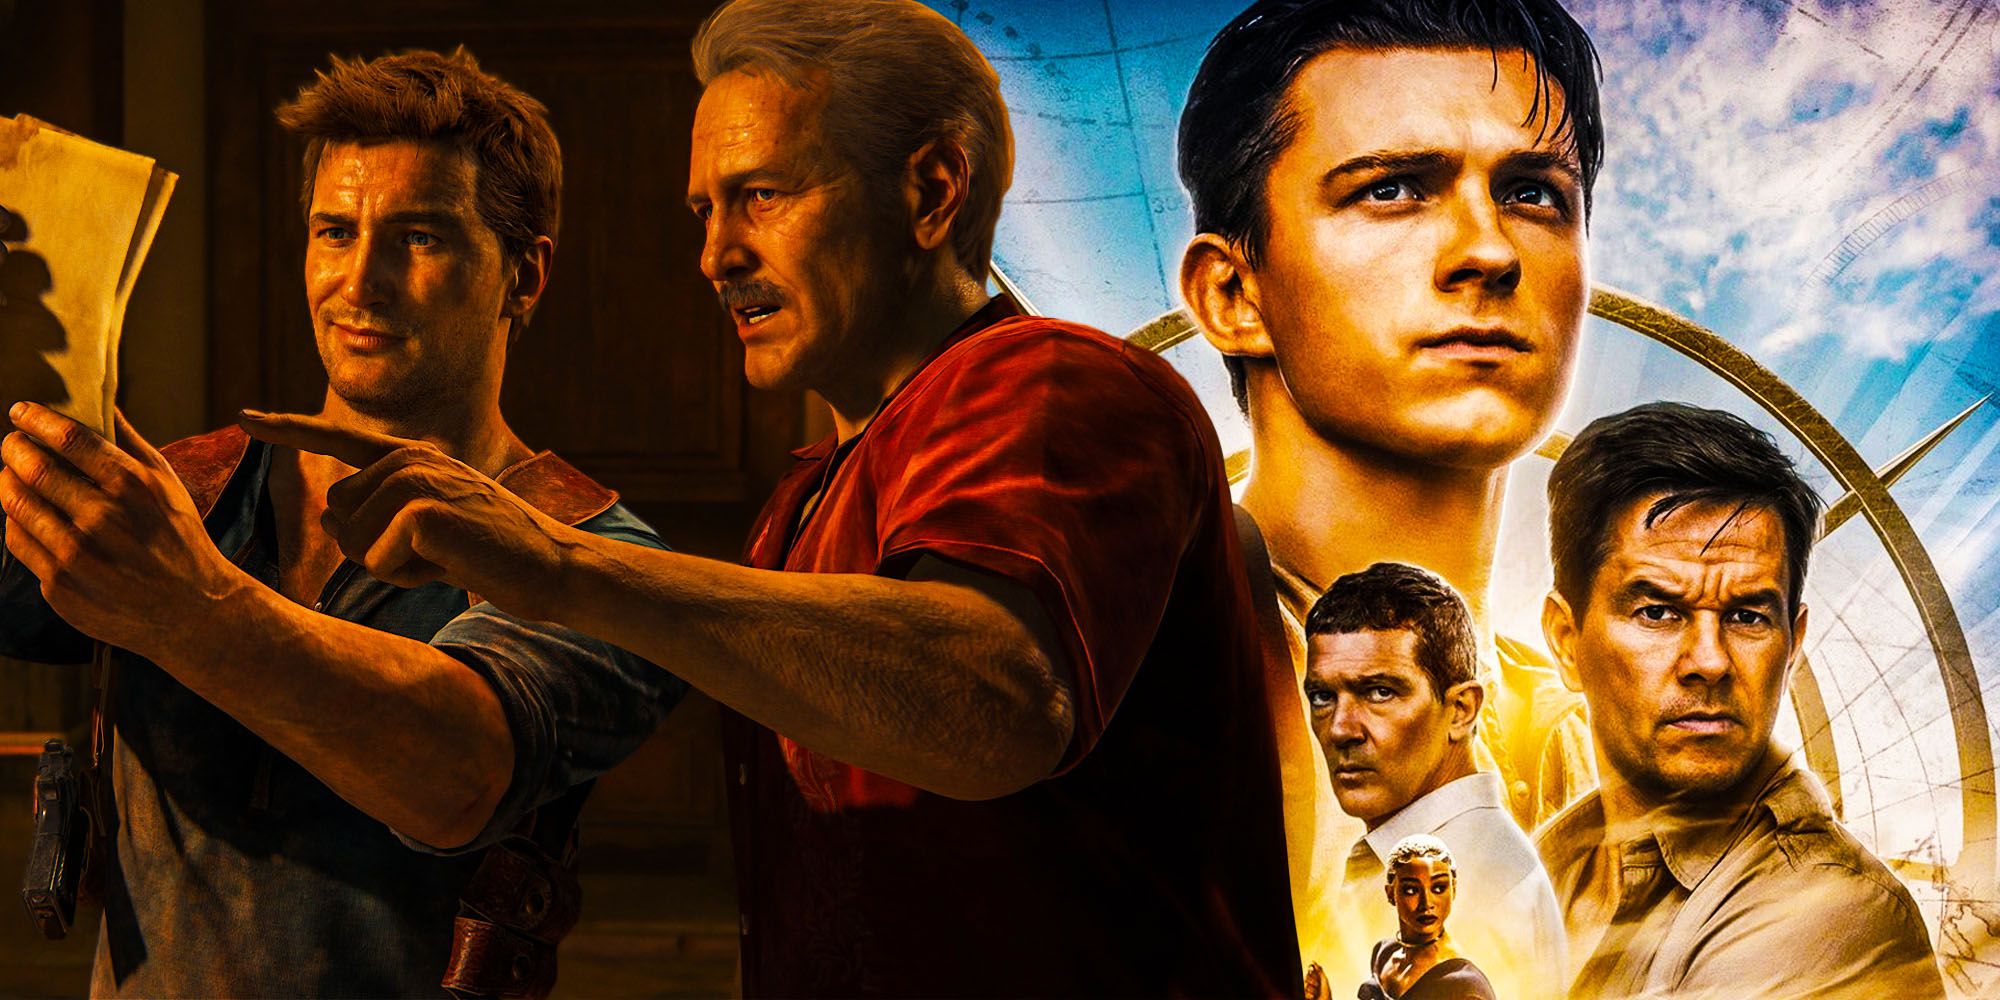 How Old Is Nathan Drake In The Uncharted Movie vs. The Games?